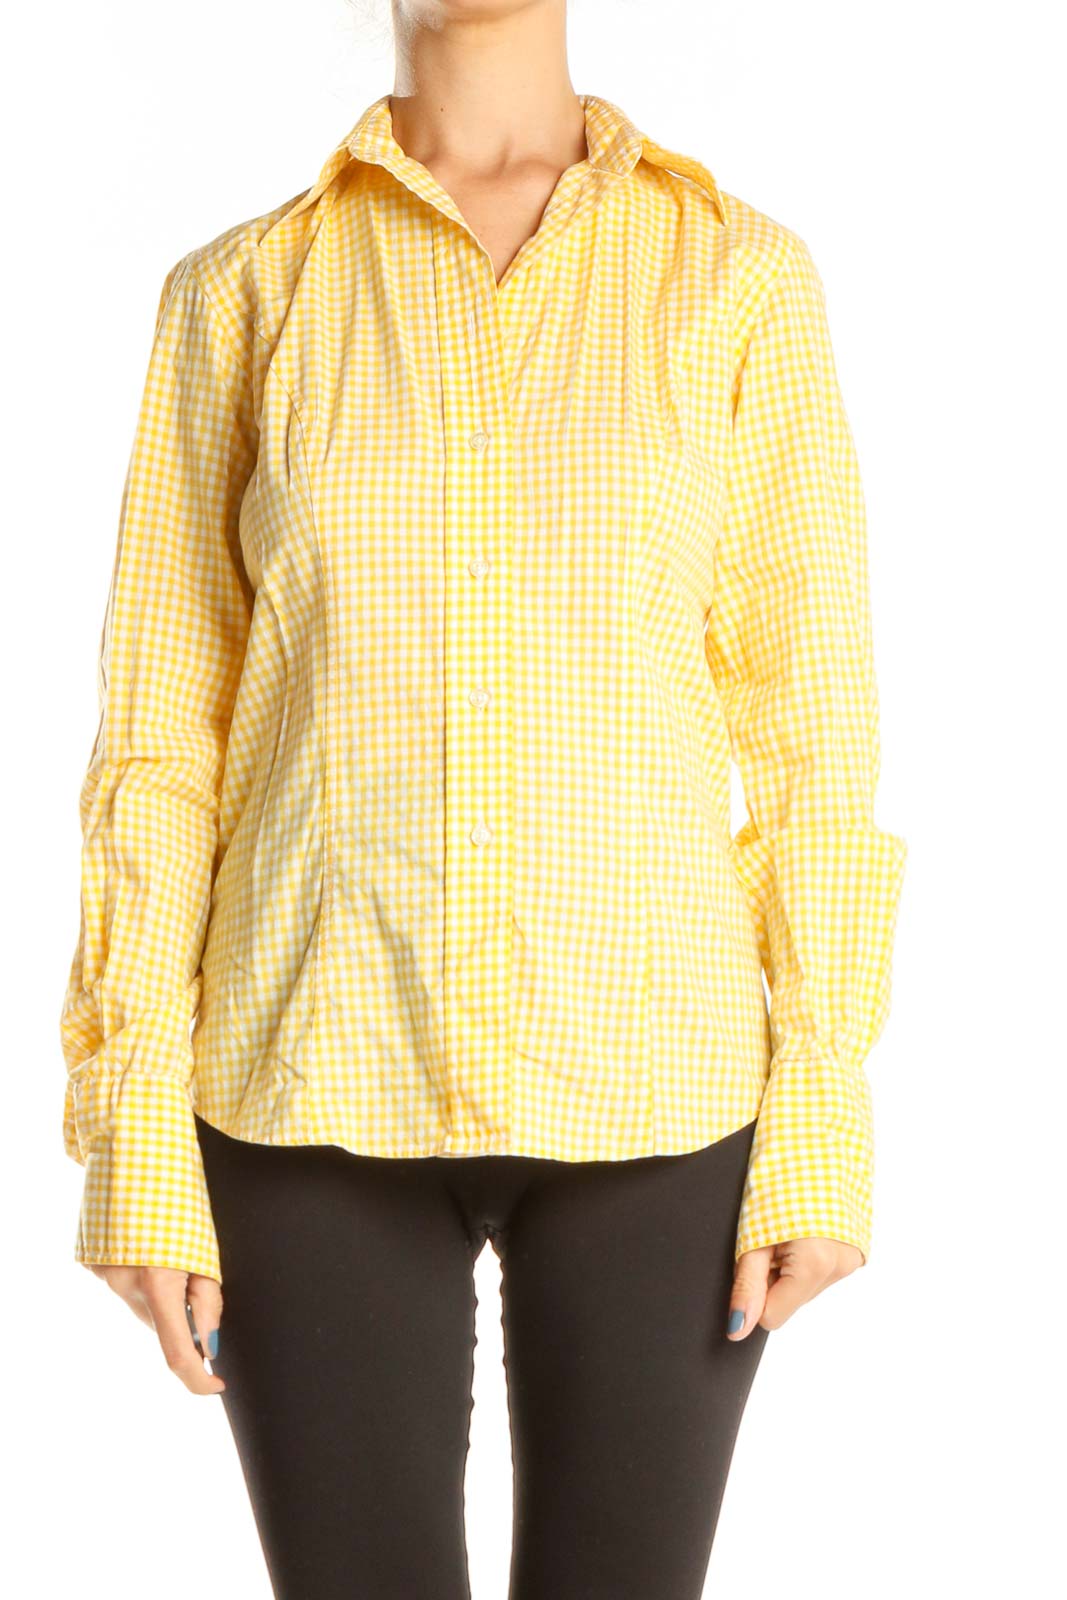 Yellow Checkered Formal Top Front